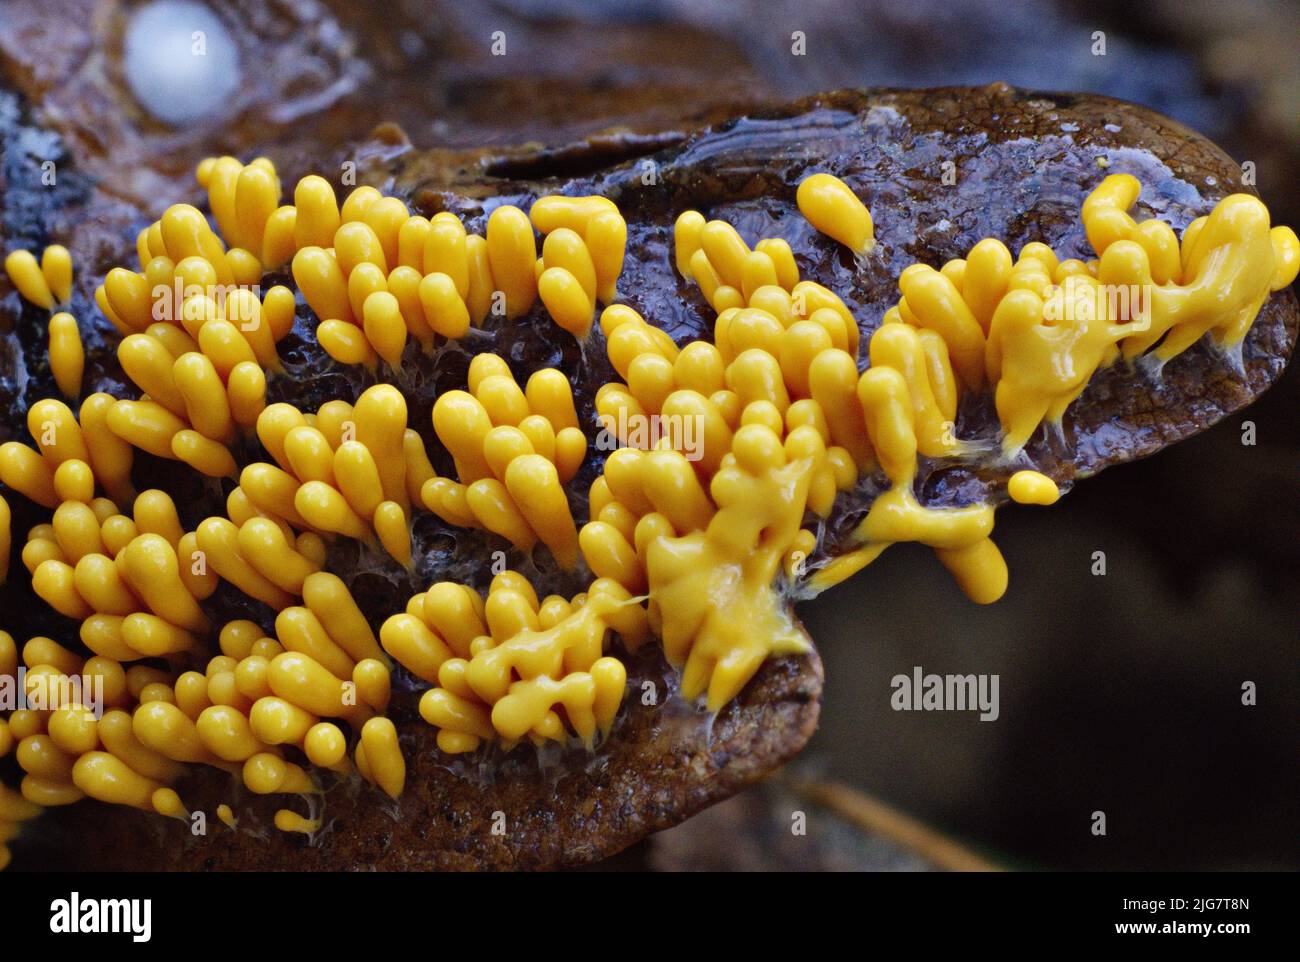 A close-up shot of yellow finger slime mold on a wet surface Stock Photo